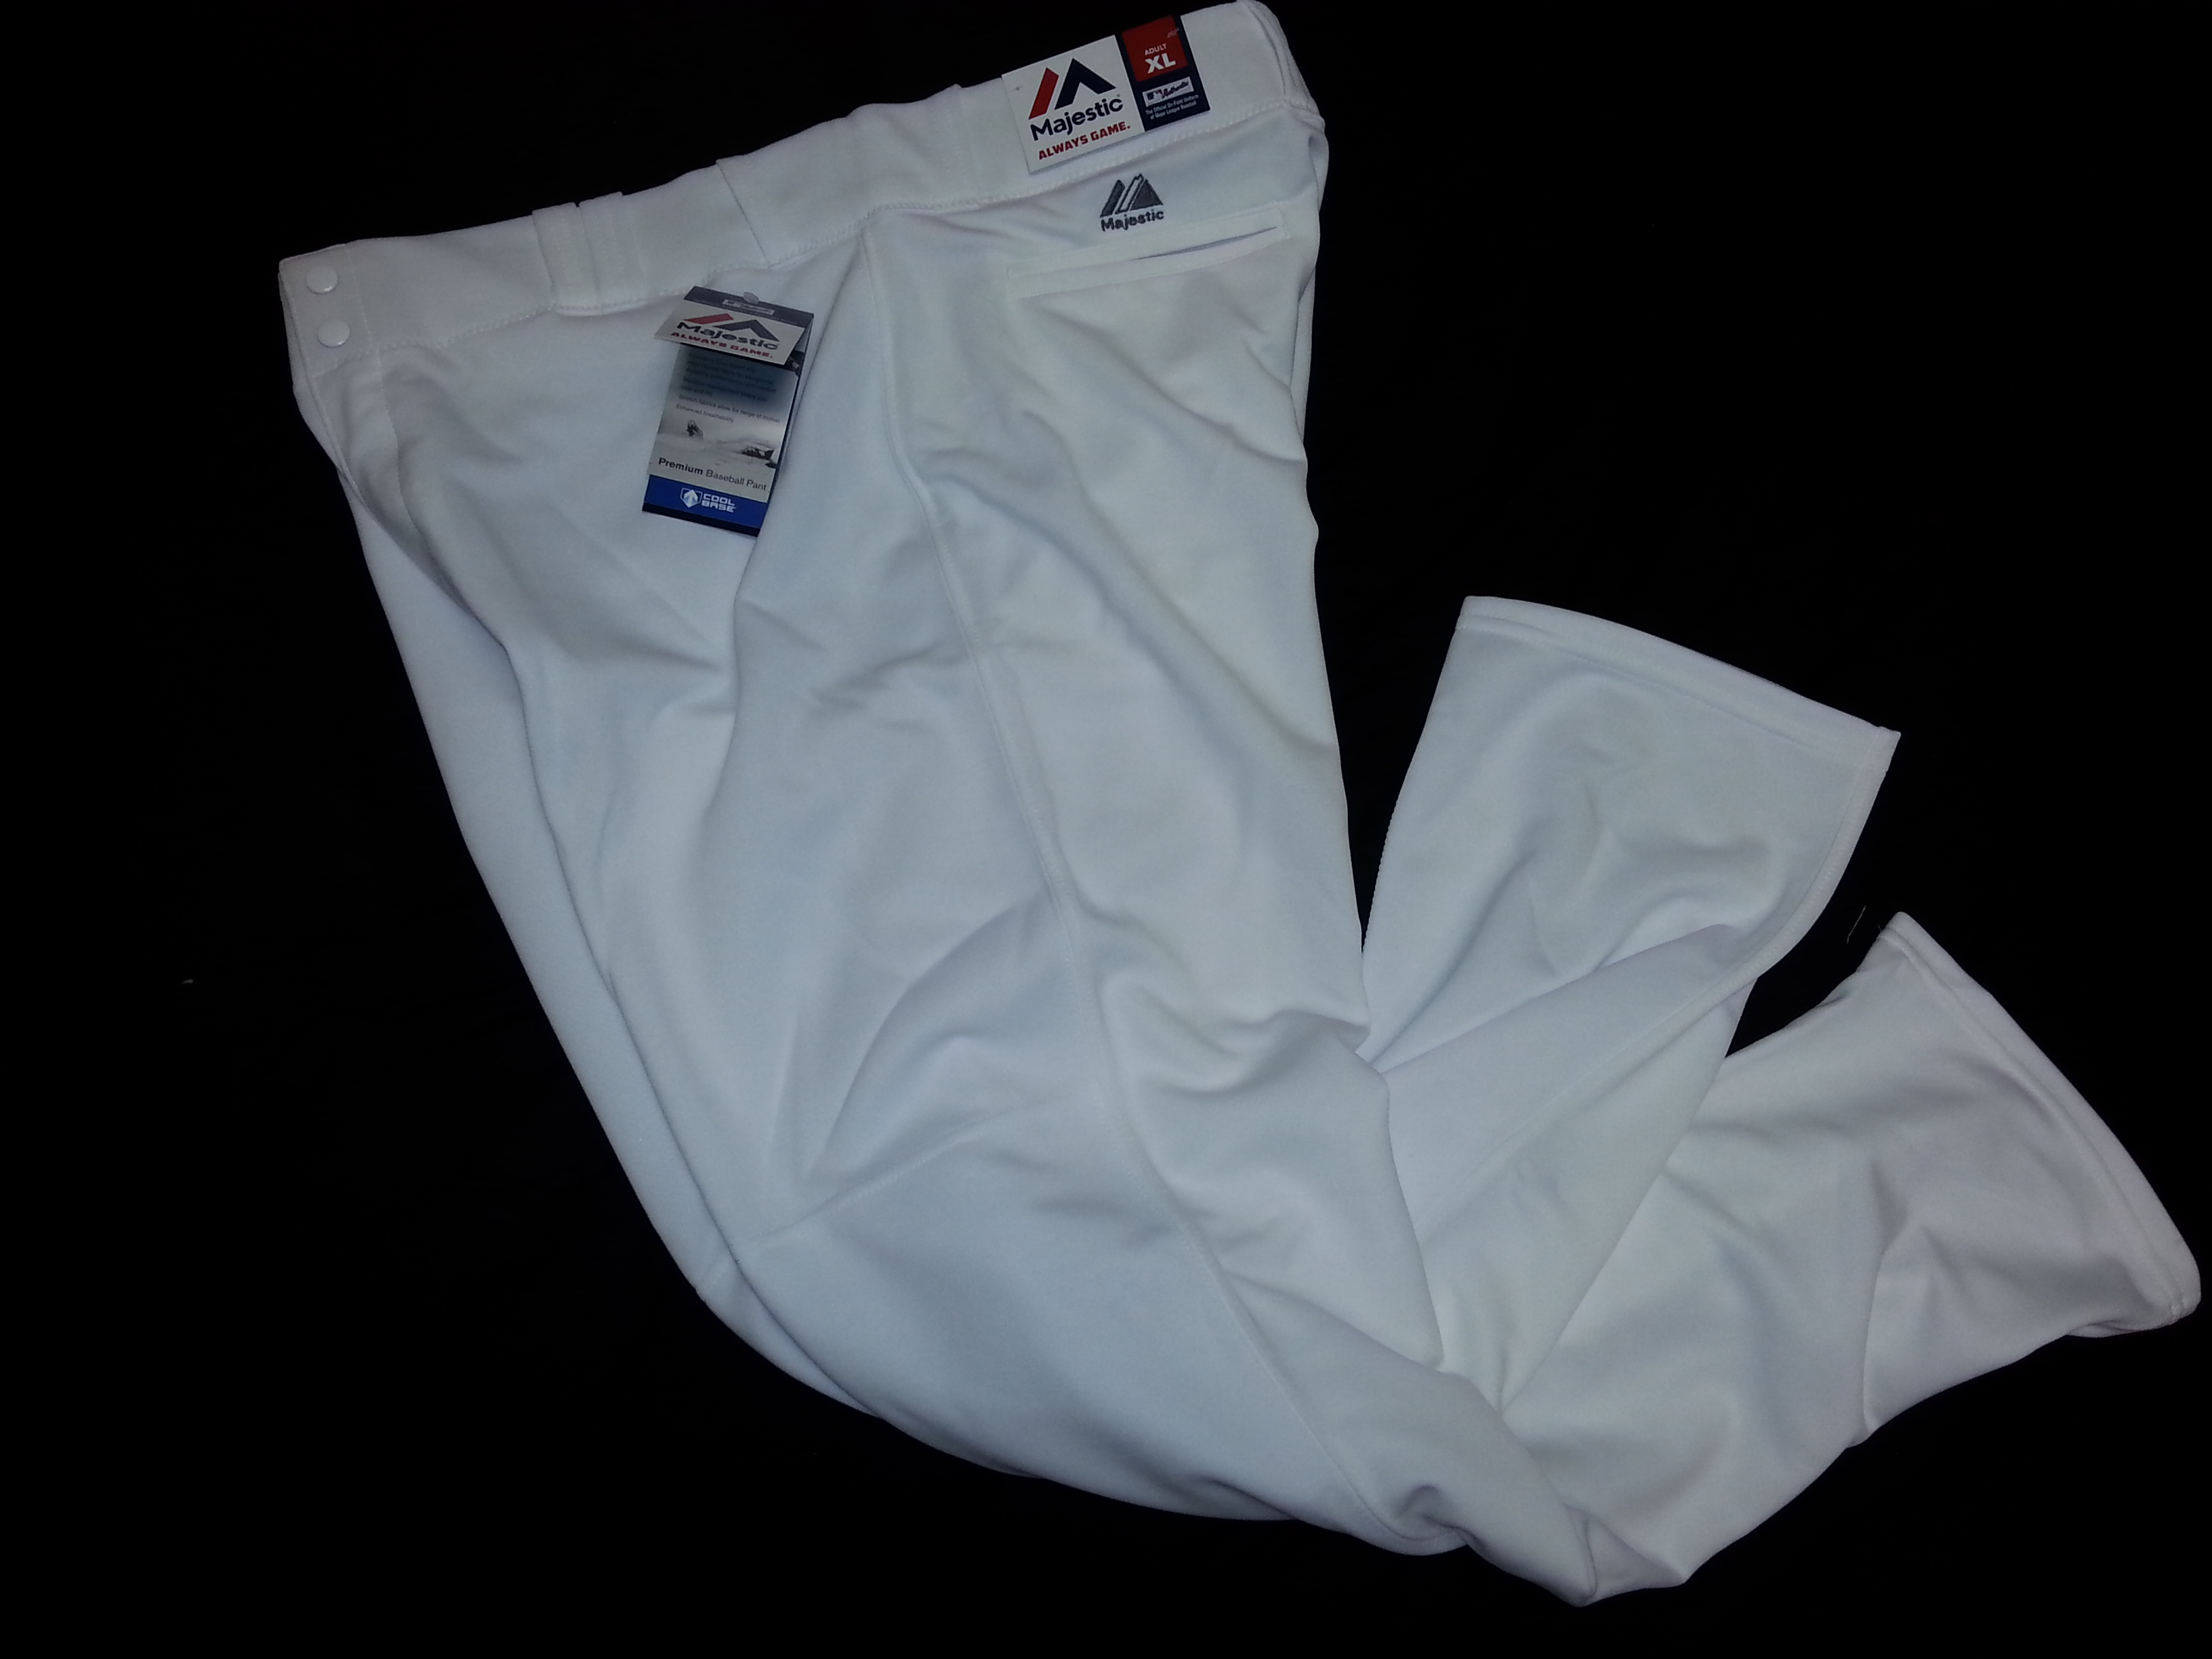 Pro Ivory/Cream fitted baseball pants Waist size 35" Details about   Giants 